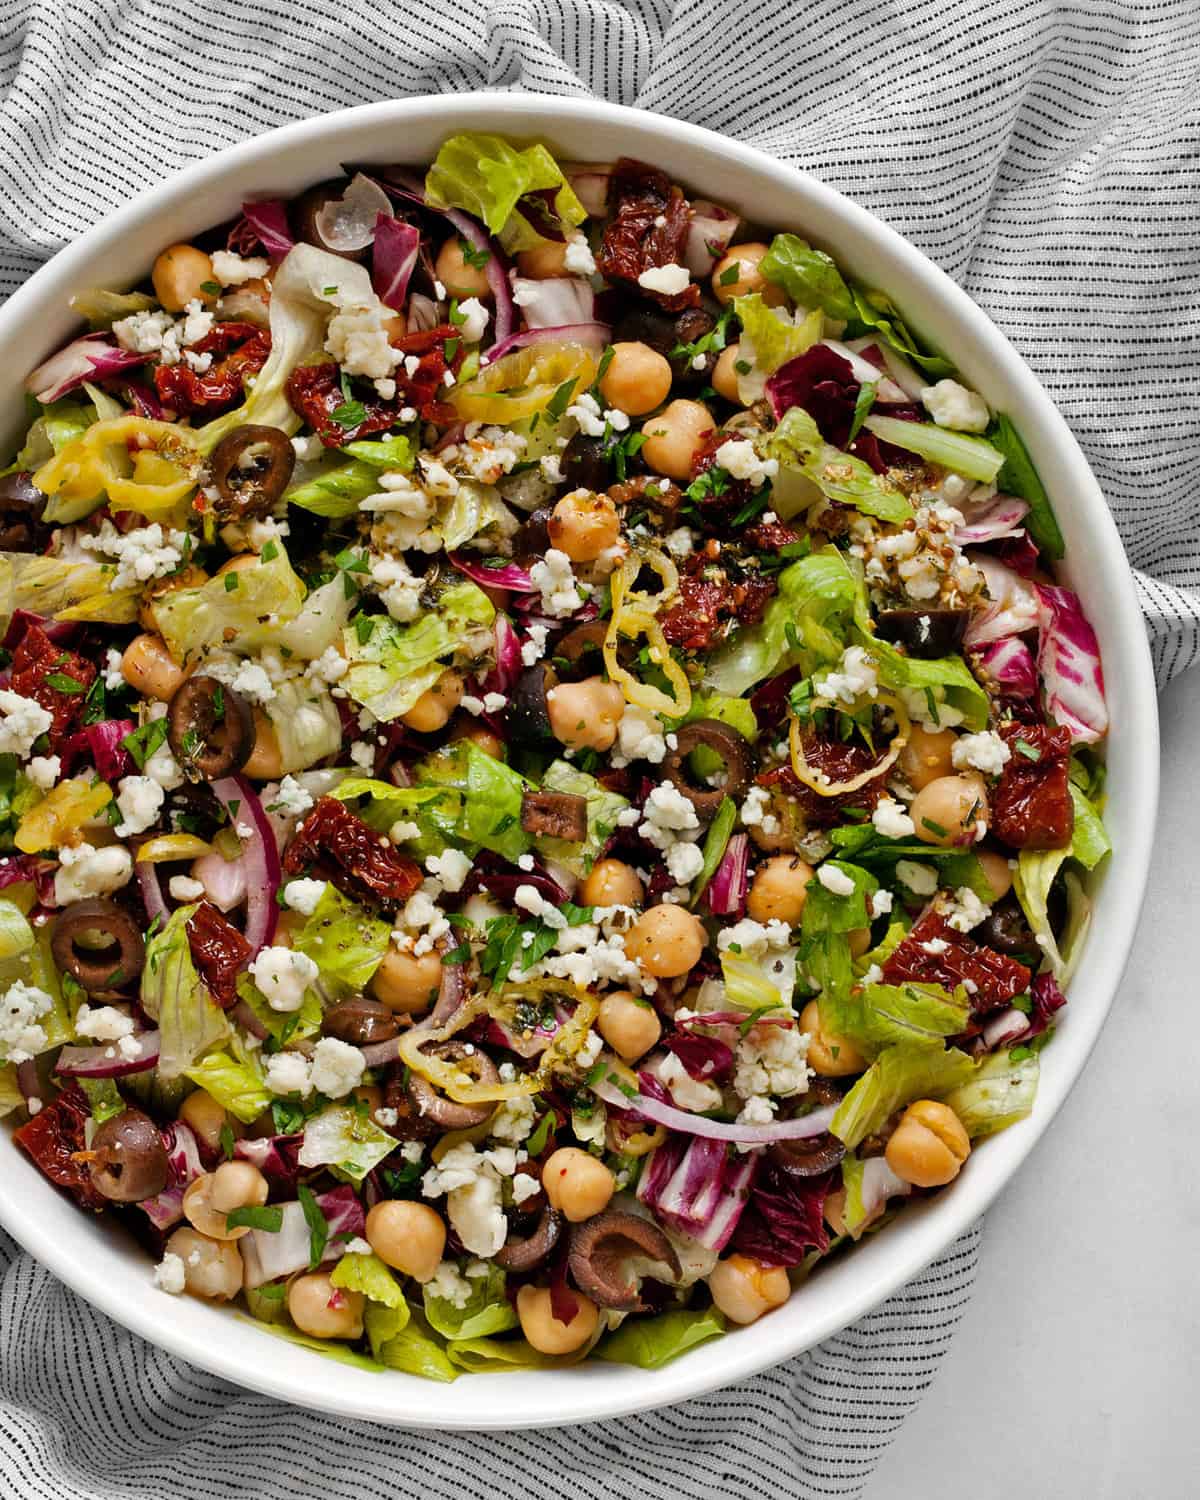 Delicious Italian Chopped Salad Recipe - Great Eight Friends